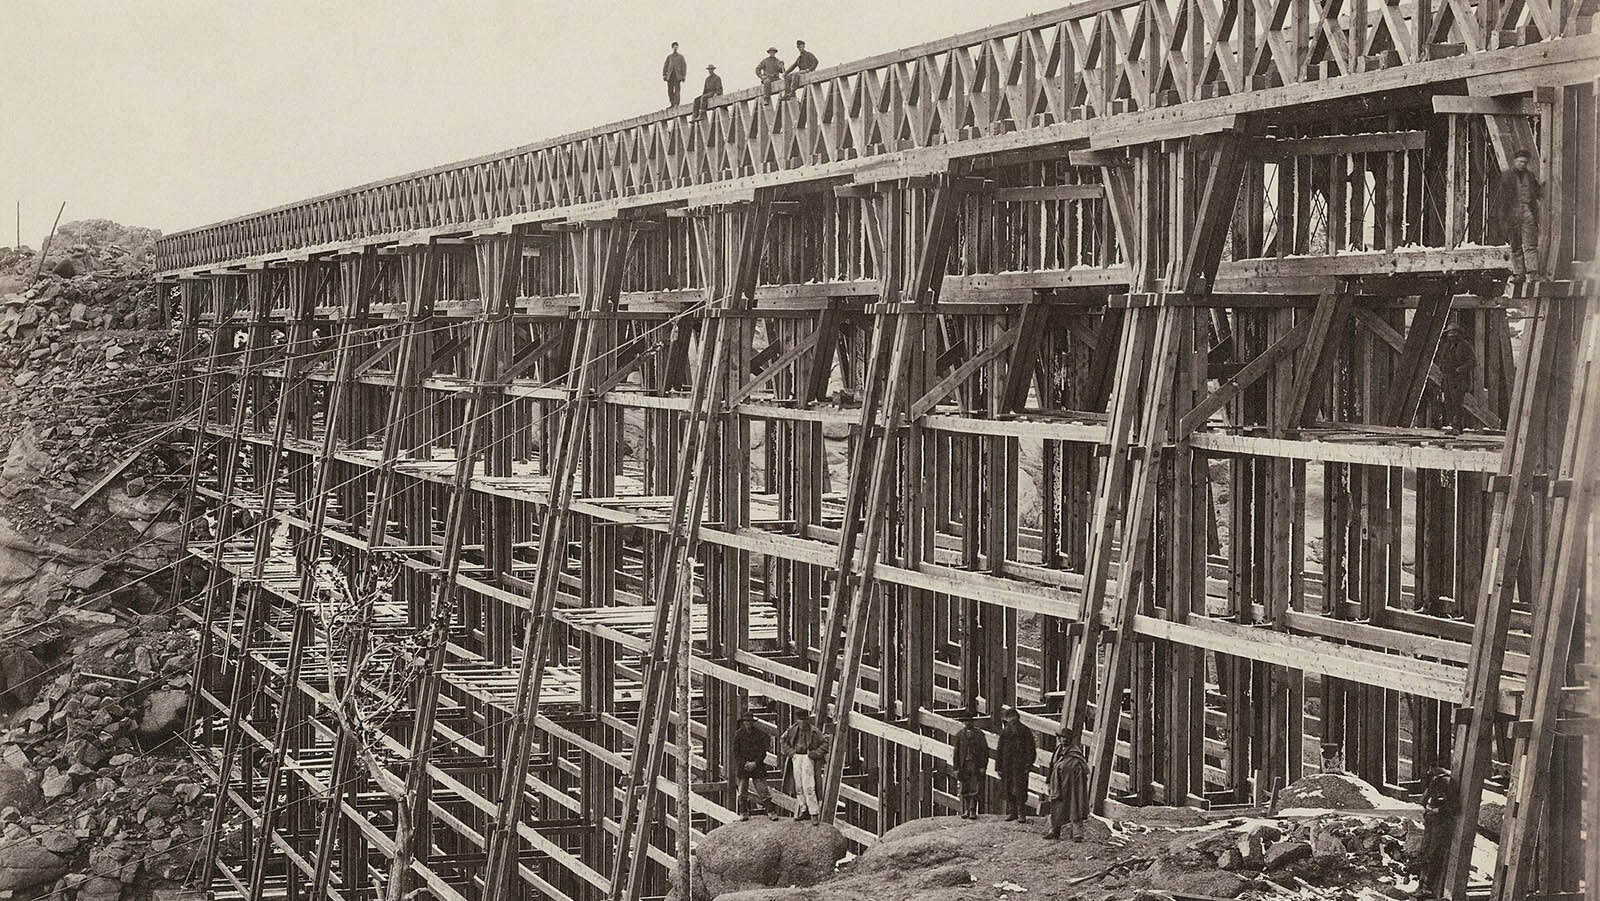 The Dale Creek Crossing south of Laramie on the Union Pacific line was one of the largest railroad bridges in the world when it was constructed in 1869. This photograph was published in Harper’s Weekly in 1869.